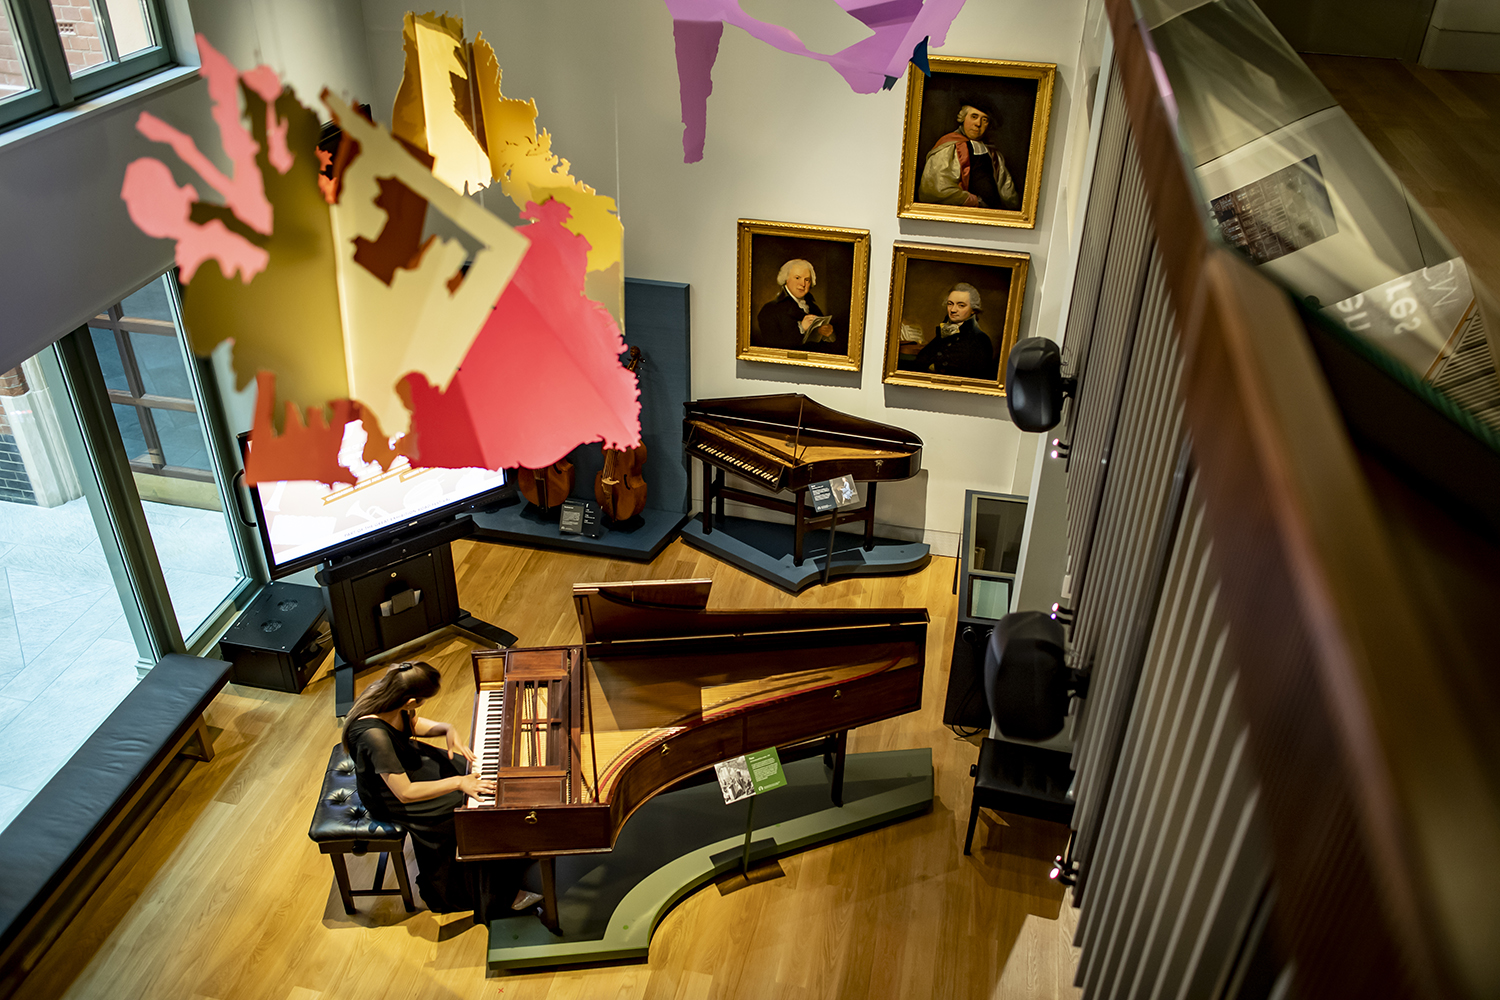 A photograph taken from the balcony of a woman performing on a fortepiano in the RCM Museum